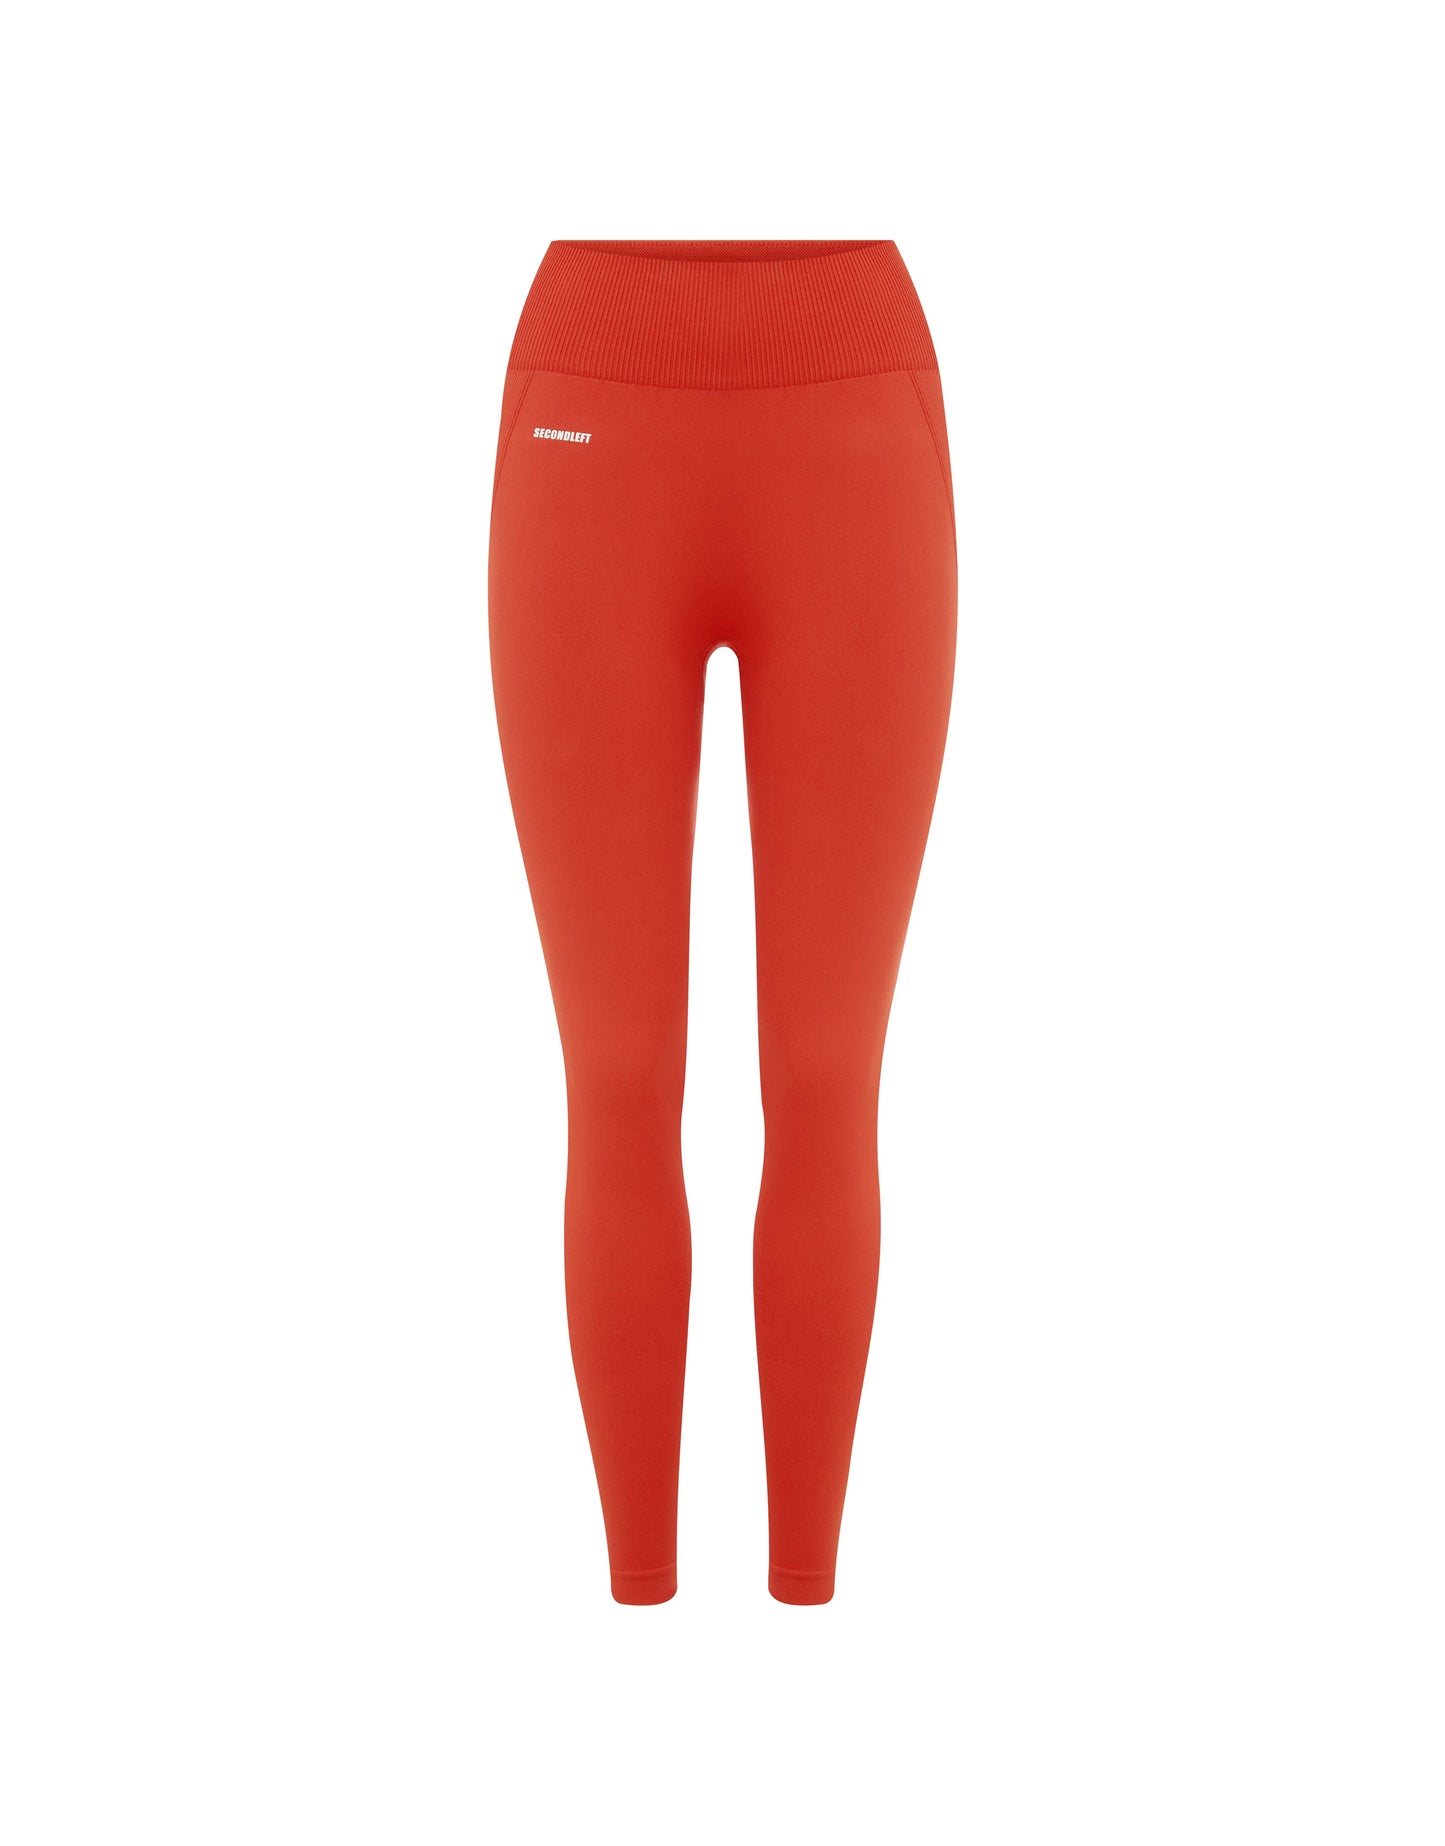 Stax Womens Leggings Athletic Workout Size Small S Full length Red